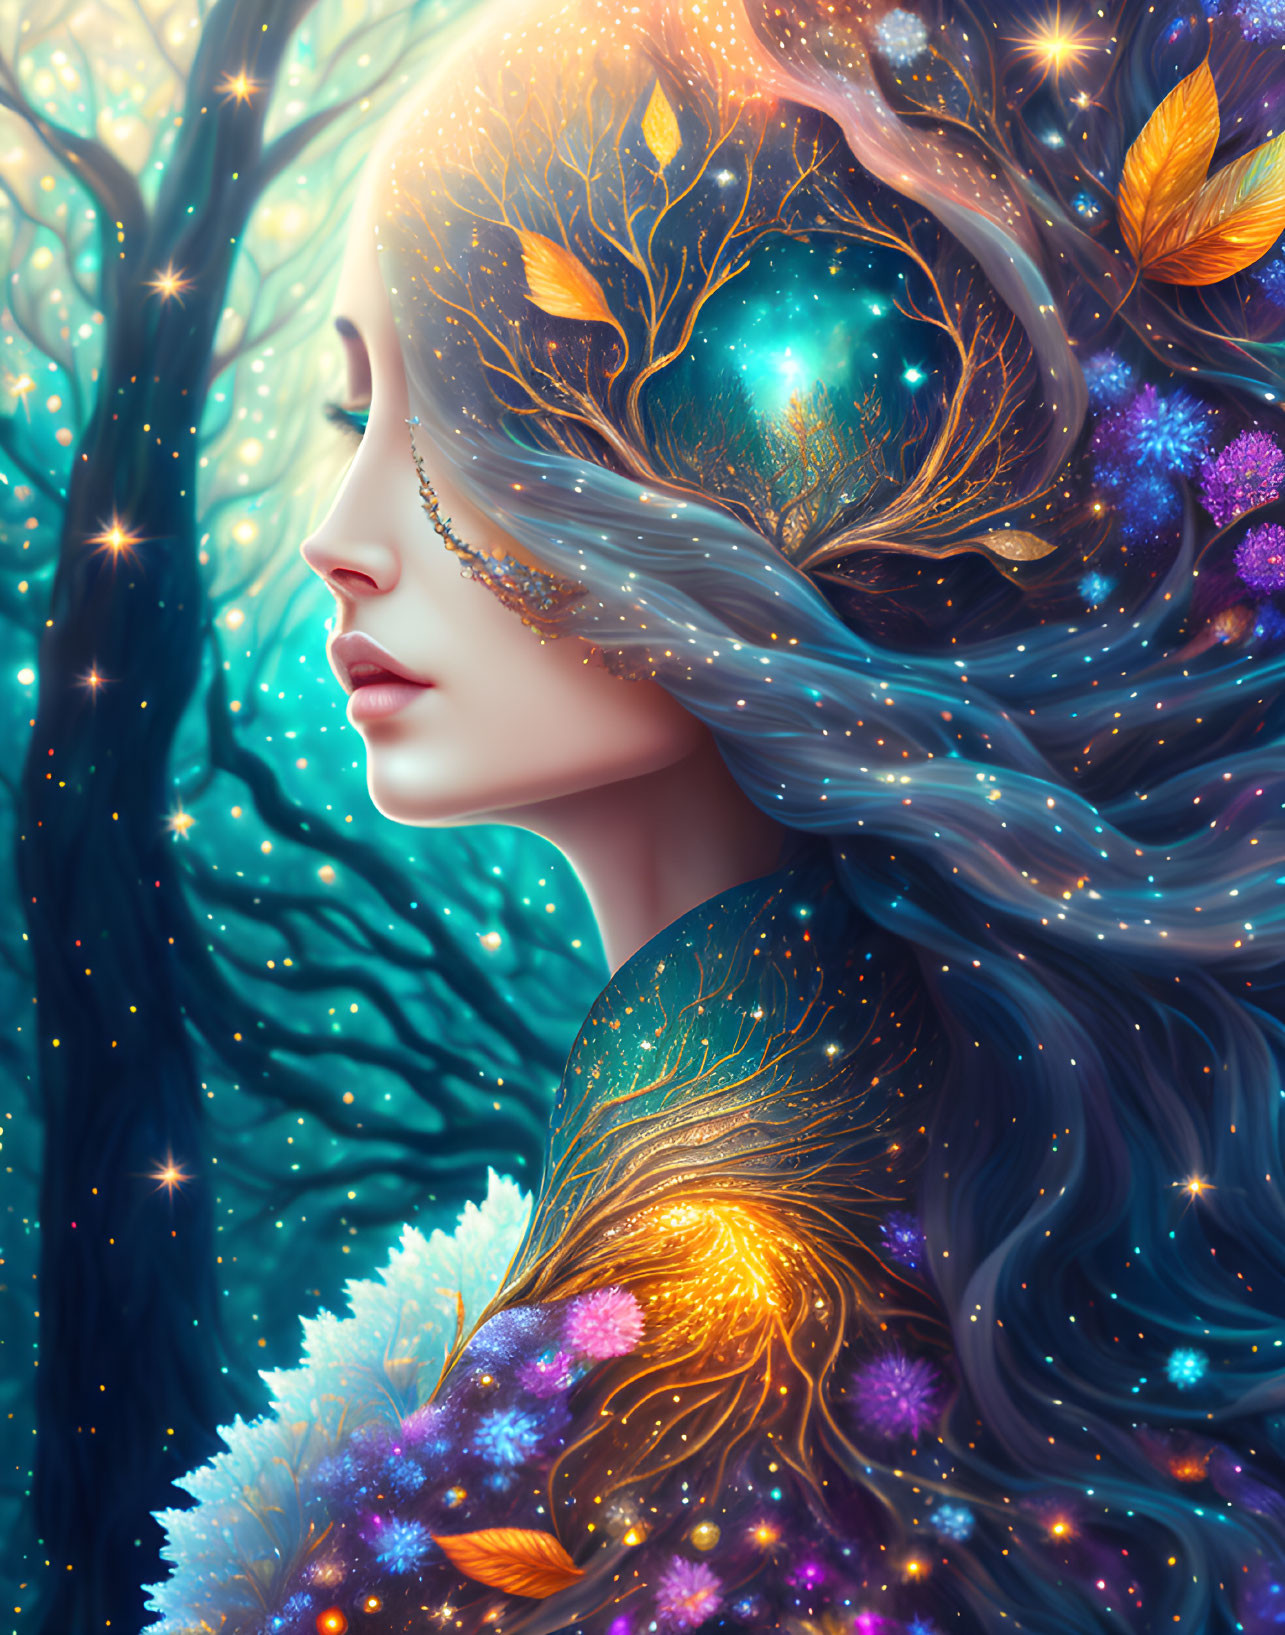 Illustration: Woman with flowing hair among glowing trees, leaves, and flowers